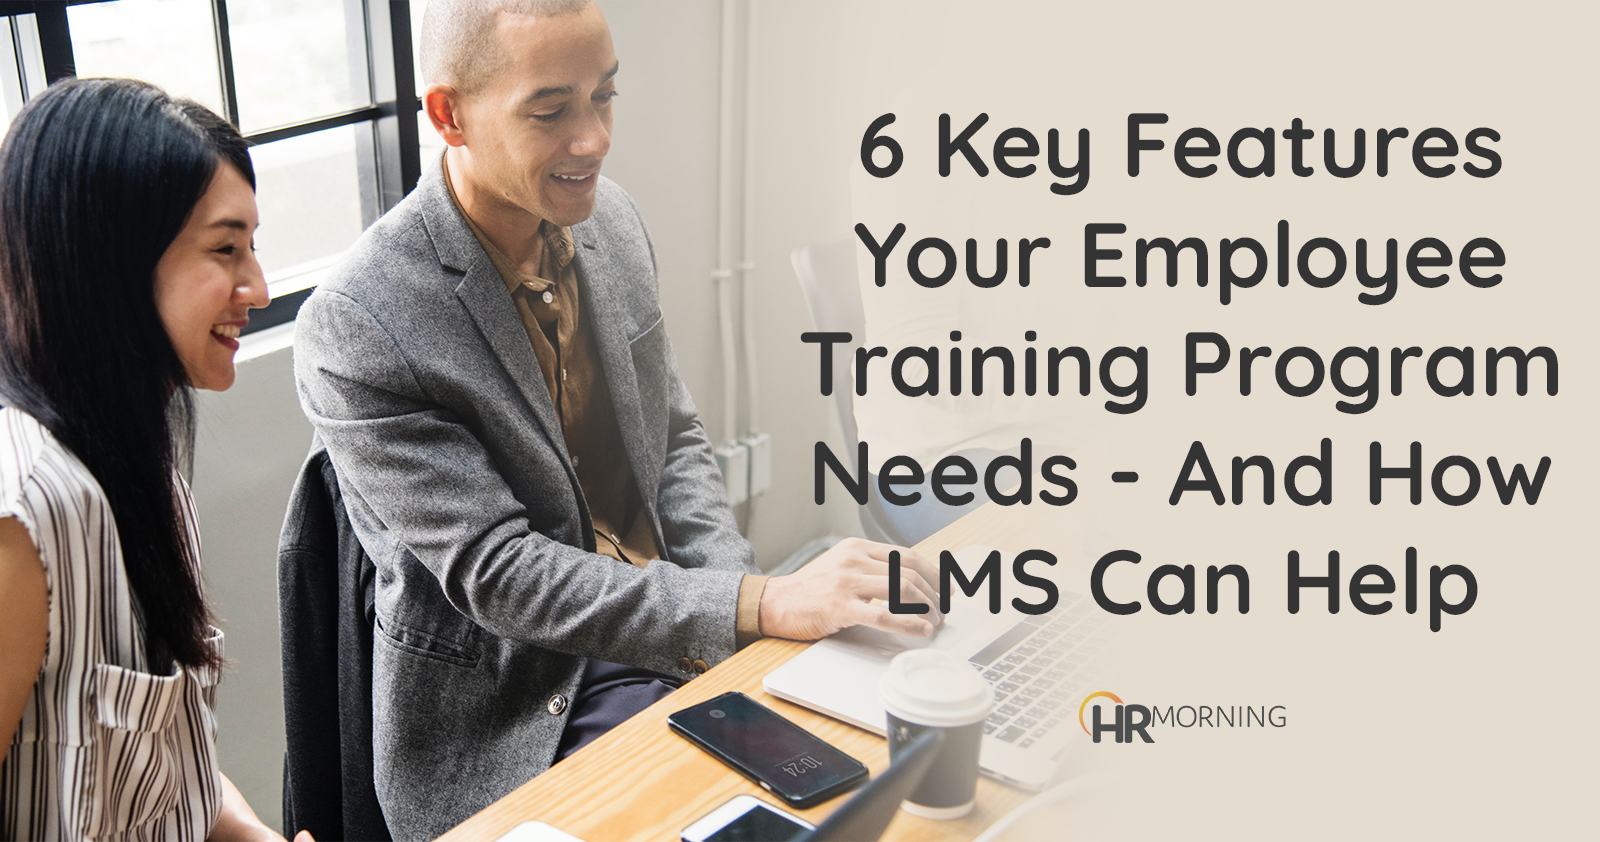 6 key features your employee training program need and how LMS can help